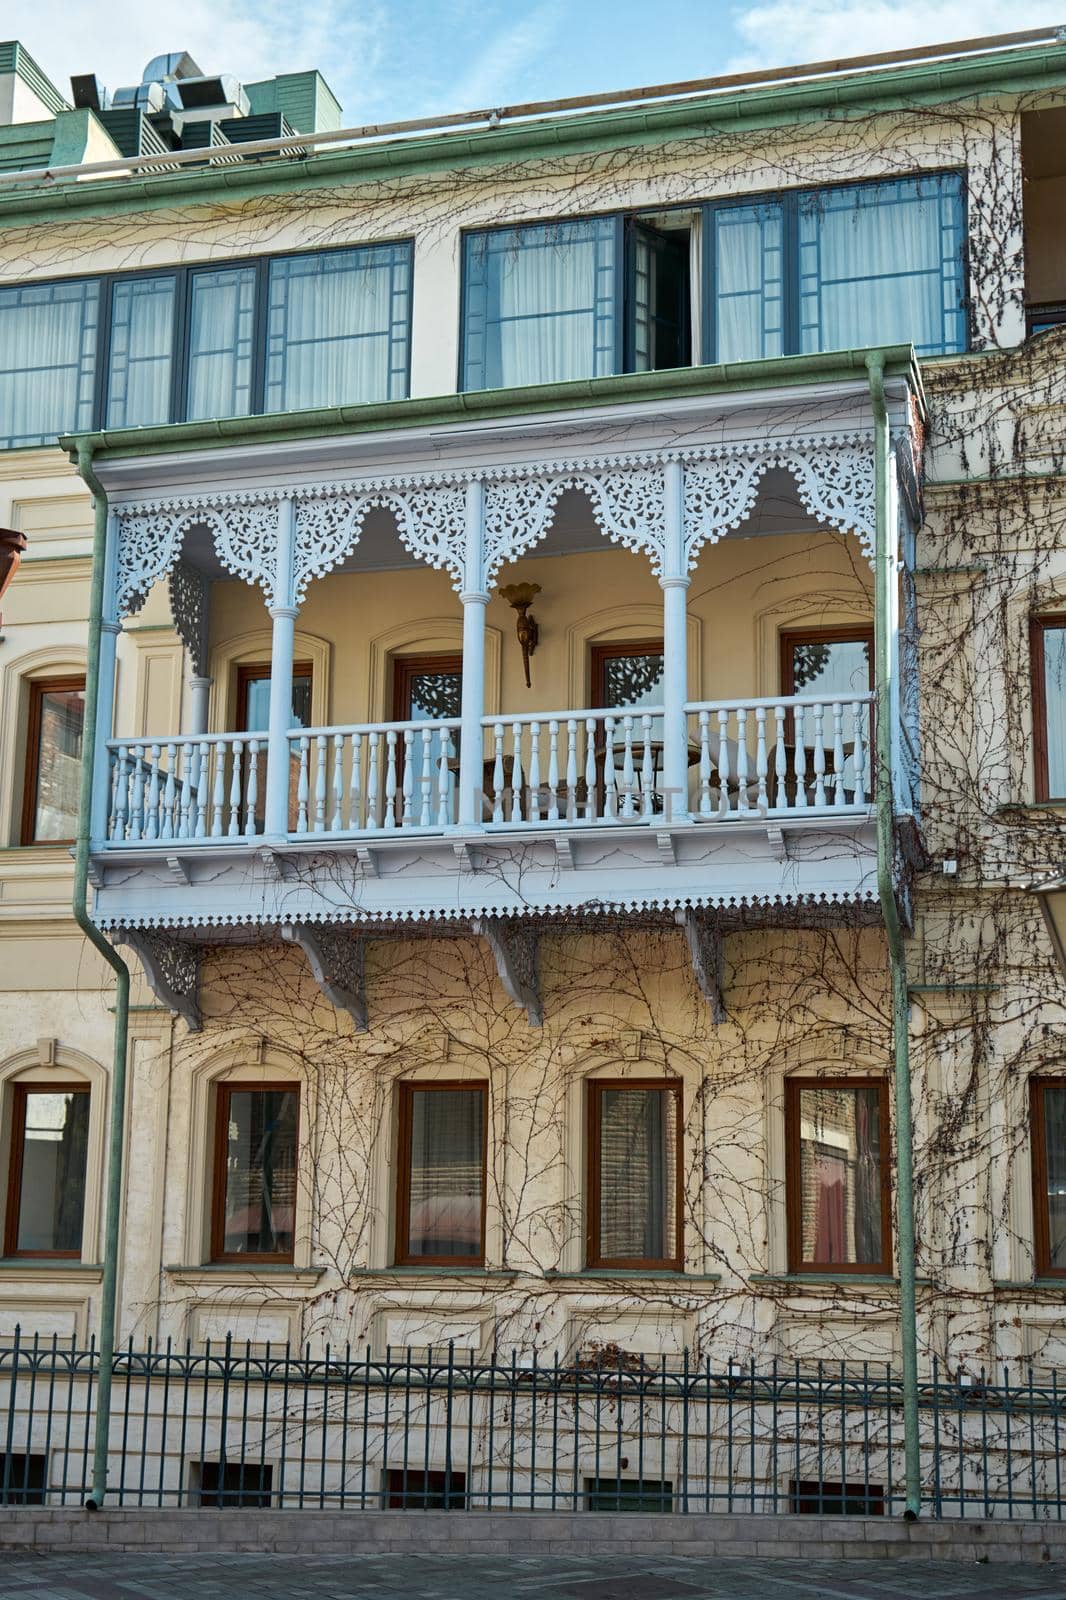 Authentic architecture of a cozy area of the old city of Tbilisi.